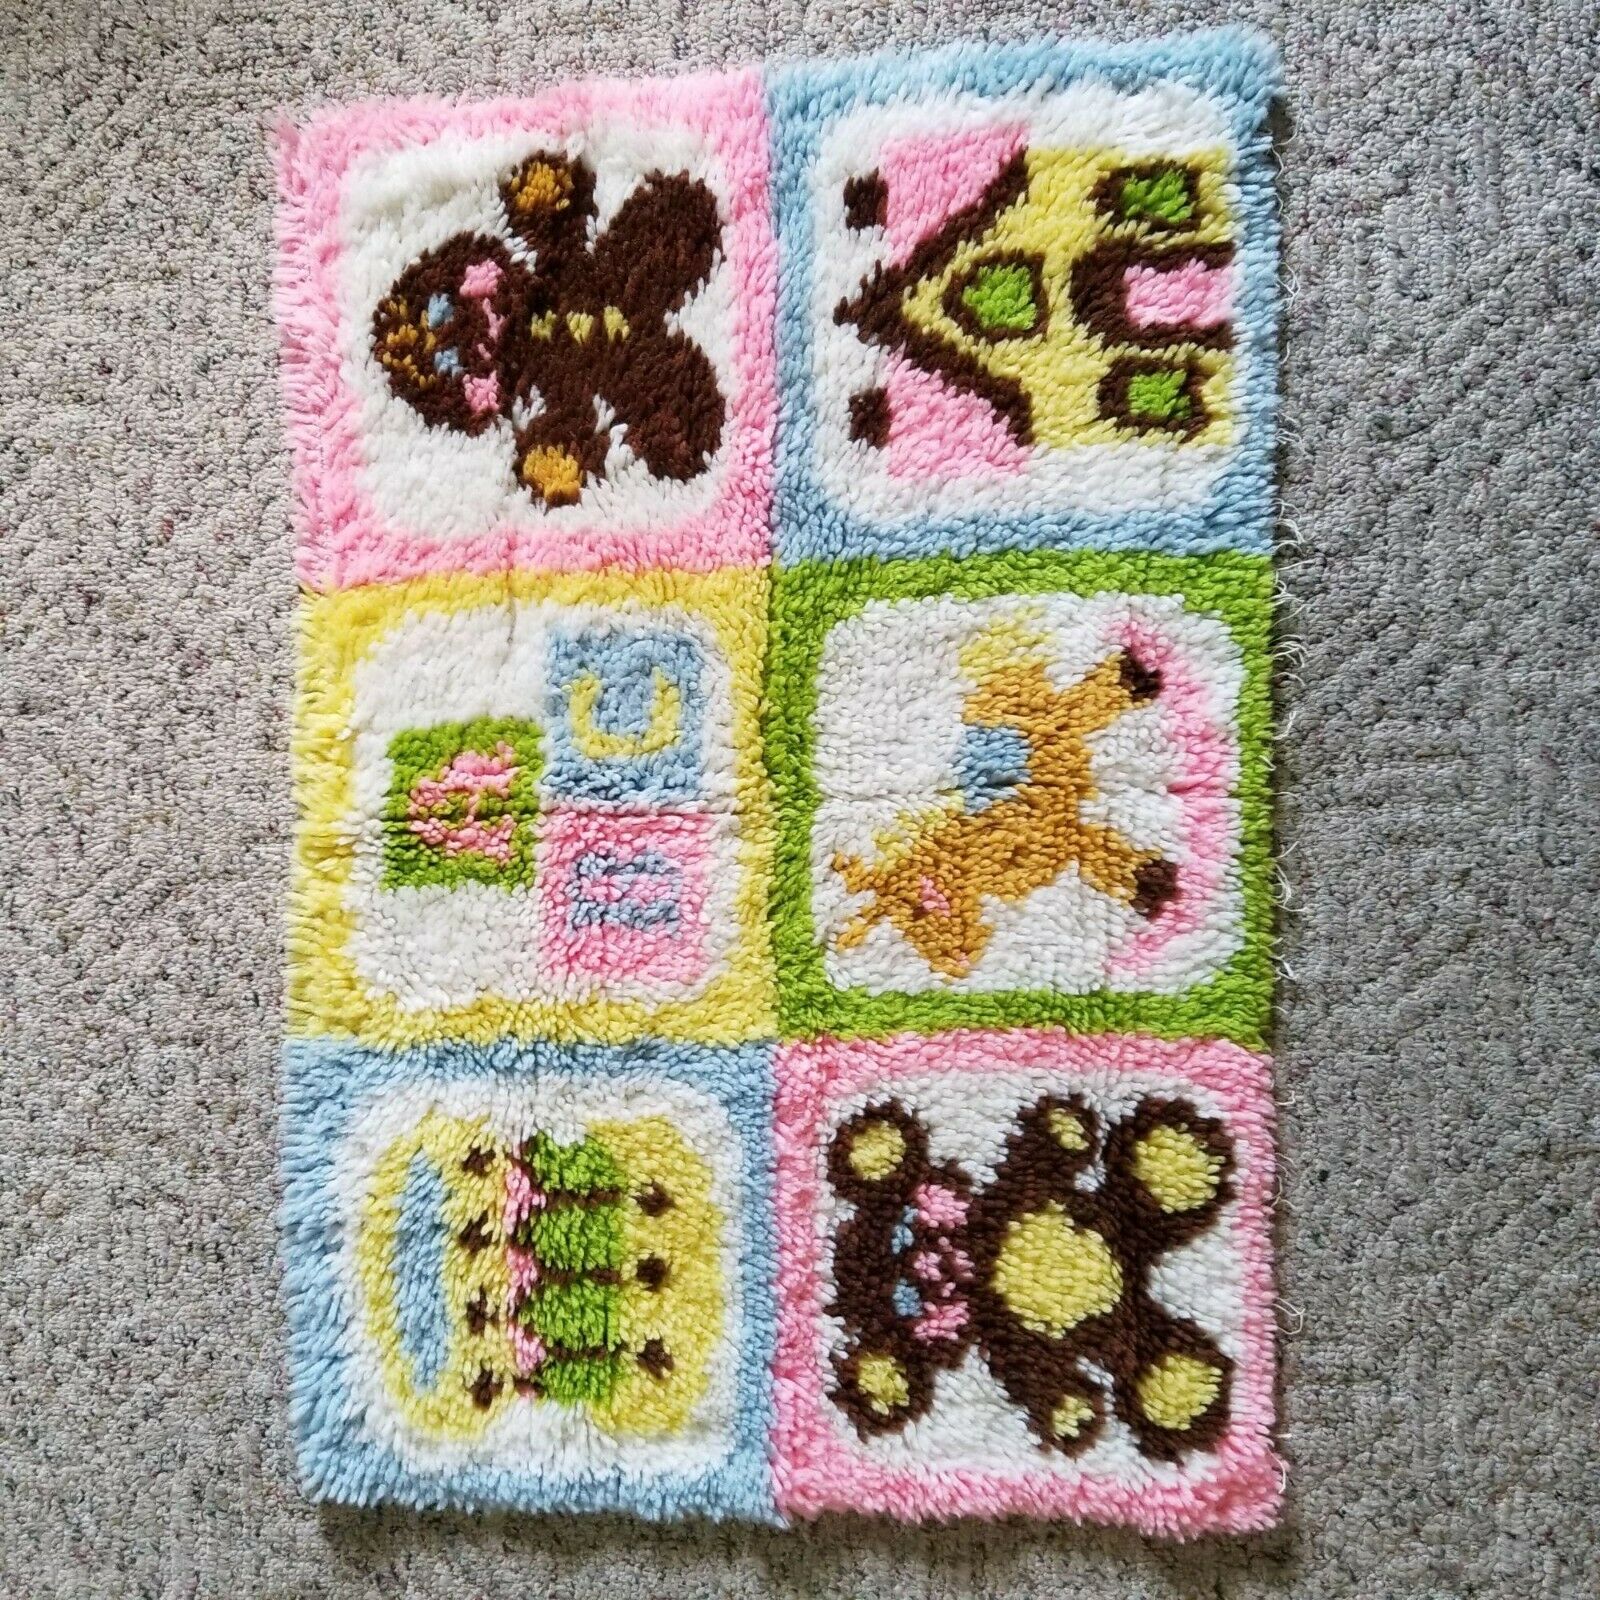 Latch Hook Rug Baby Nursery Tapestry Home Decor Vintage Wall Hanging 22x33 in